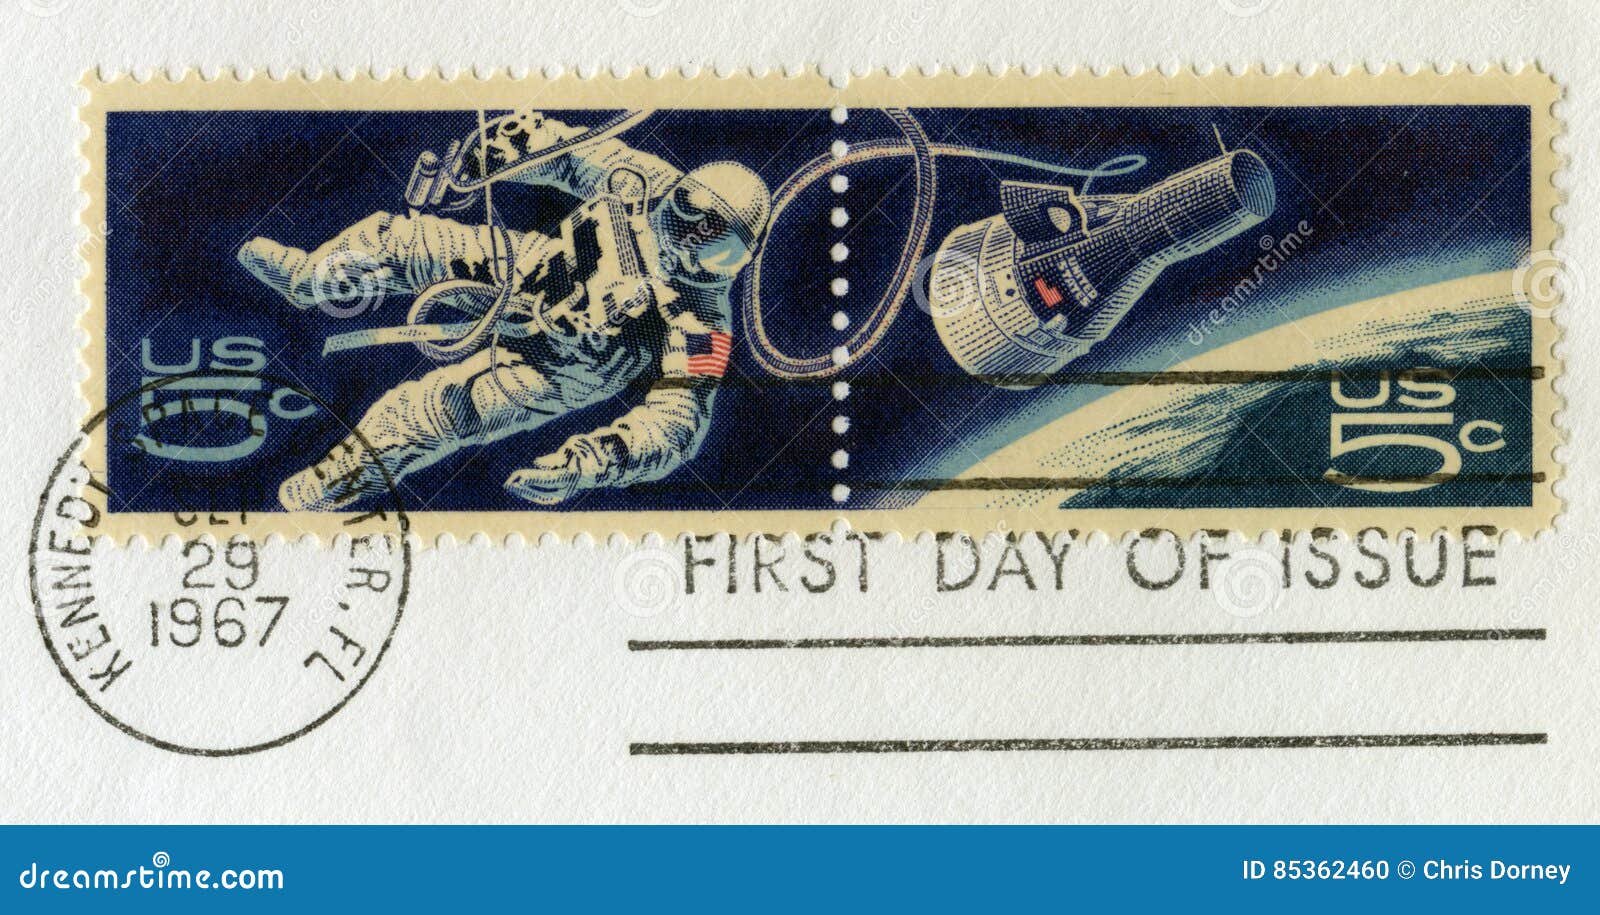 Vintage US Space Postal Stamps Editorial Image - Image of historic